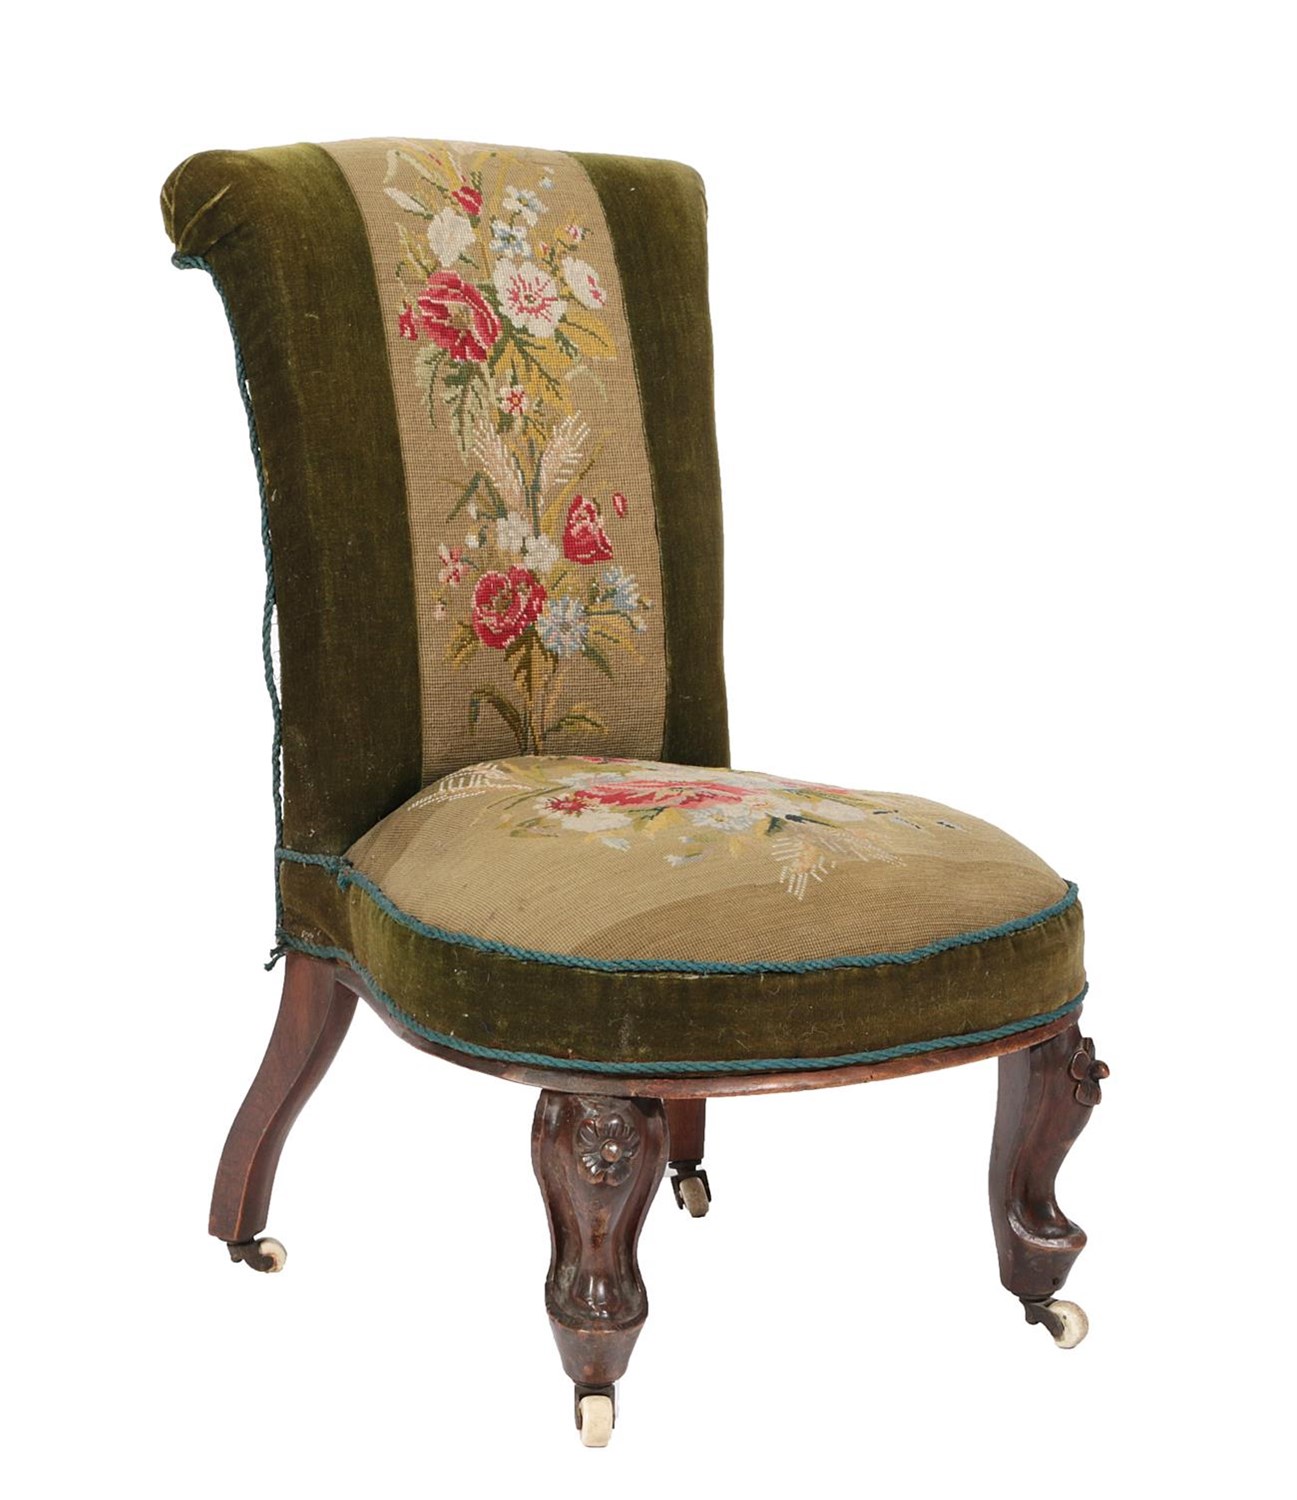 Lot 658 - ~ A Victorian Walnut Nursing Chair, circa 1870, covered in floral needlework and green velvet...